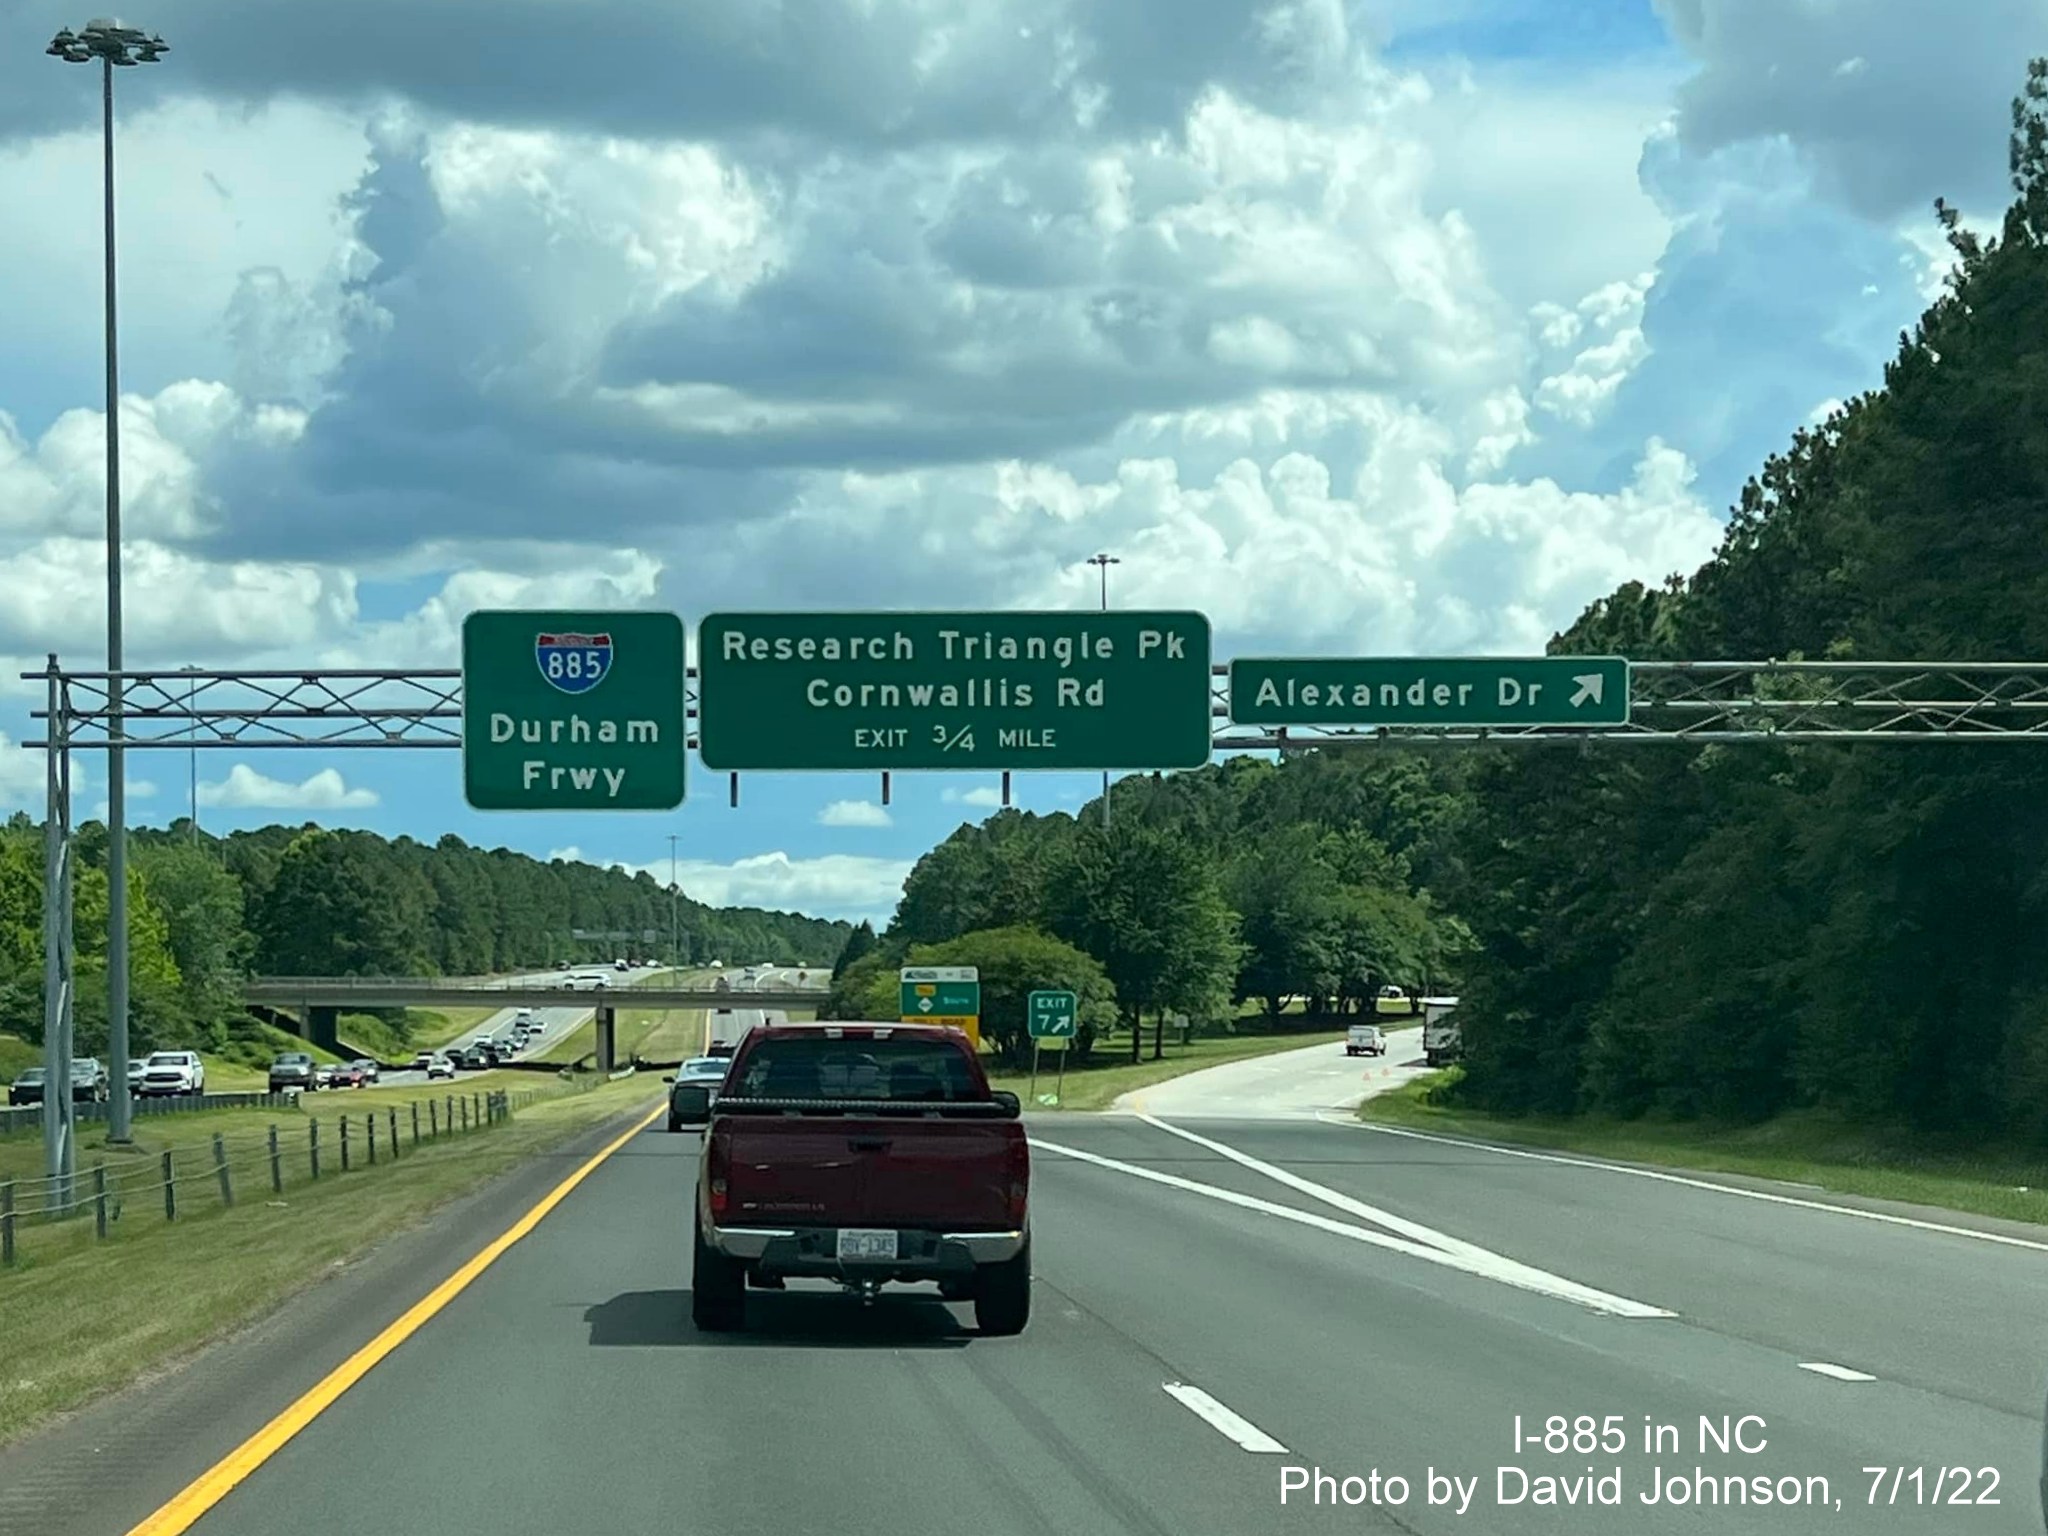 Image of I-885 pull through sign at Alexander Drive exit on Durham Freeway south in Durham, by David Johnson July 2022